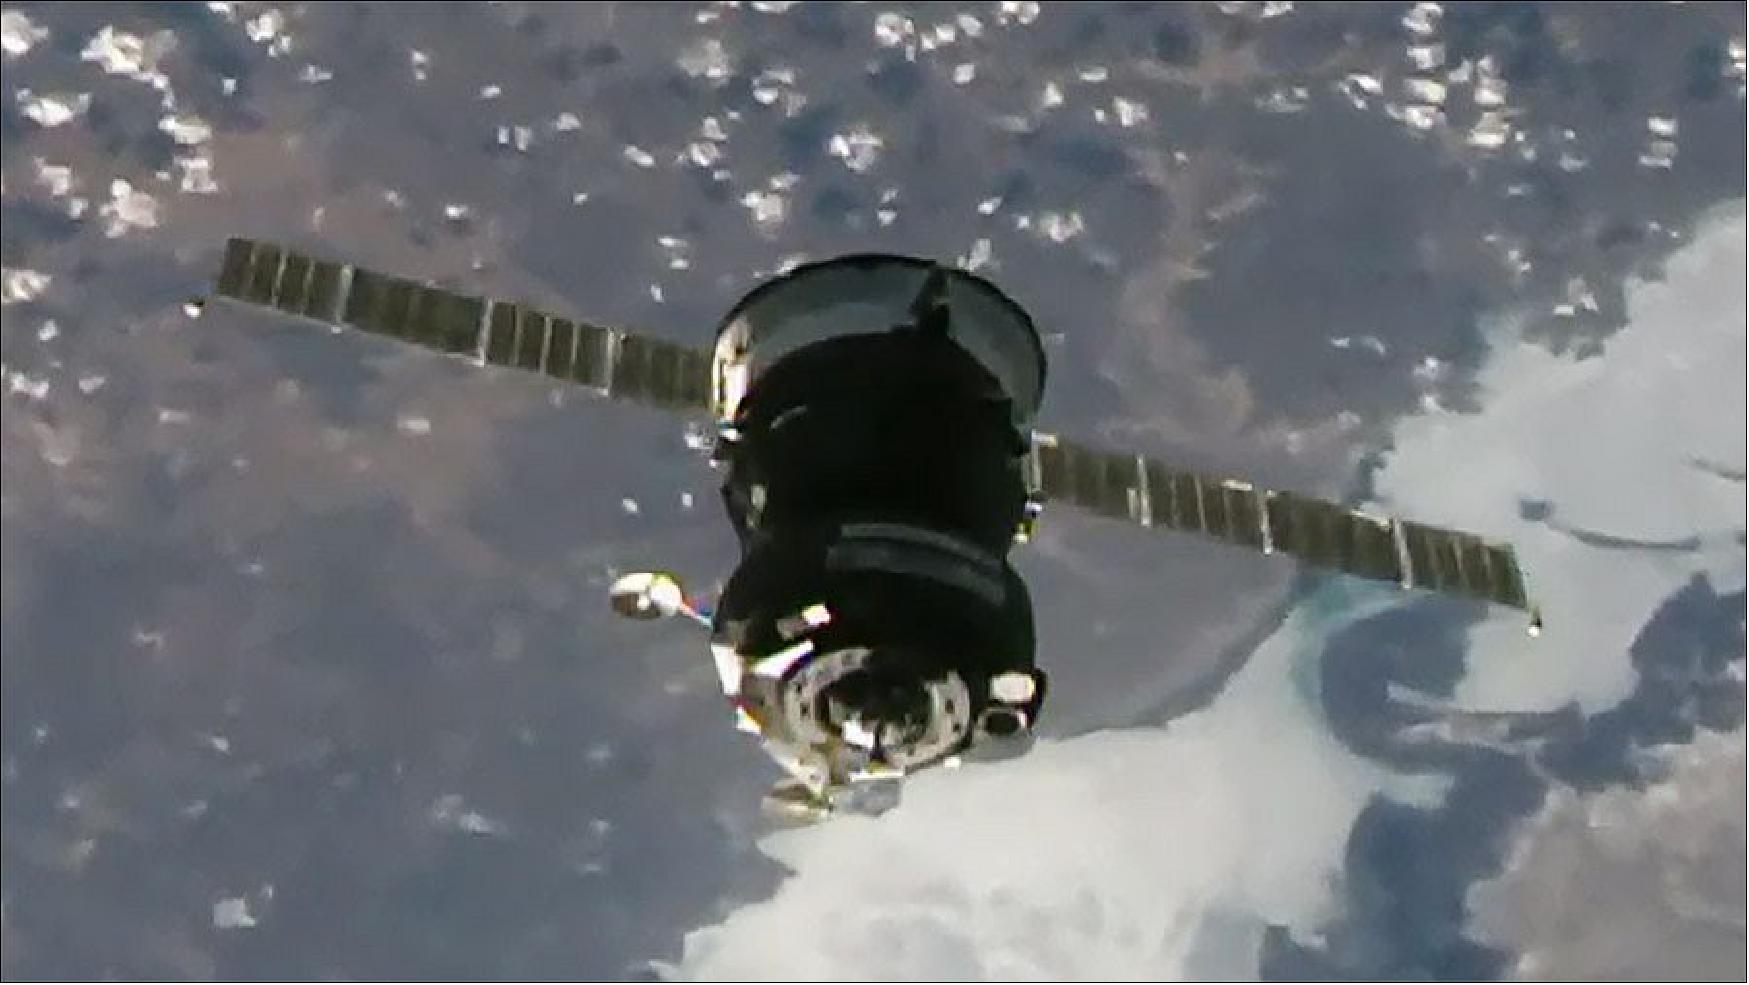 Figure 102: The Soyuz MS-18 crew ship is pictured on final approach to its docking port on the space station's Rassvet module (image credit: NASA TV) 89)